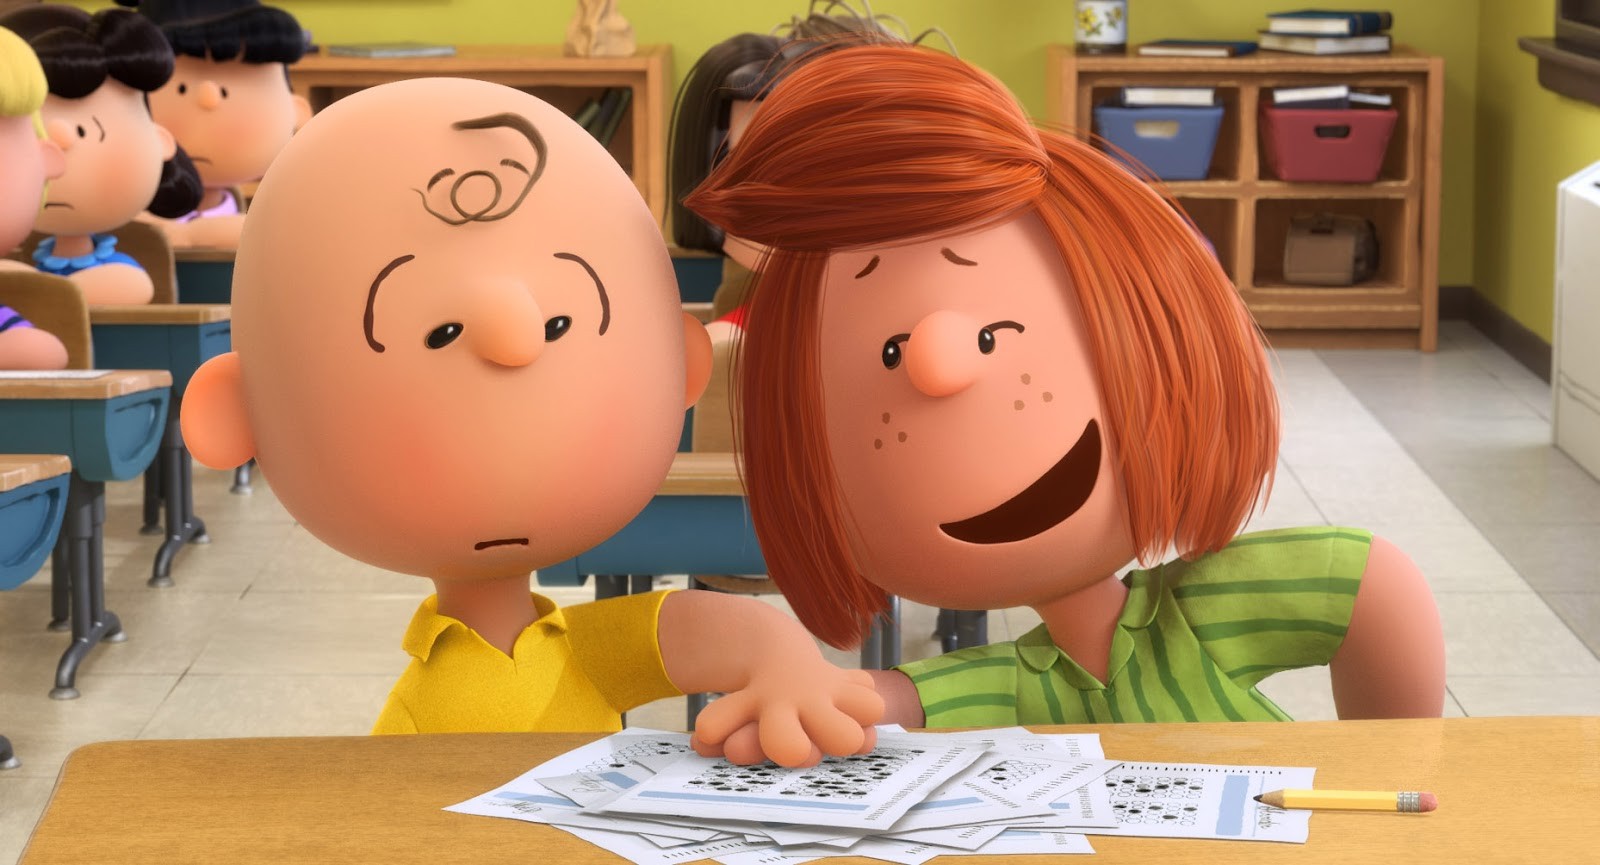 Charlie Brown and Peppermint Patty from 20th Century Fox's Peanuts (2015)